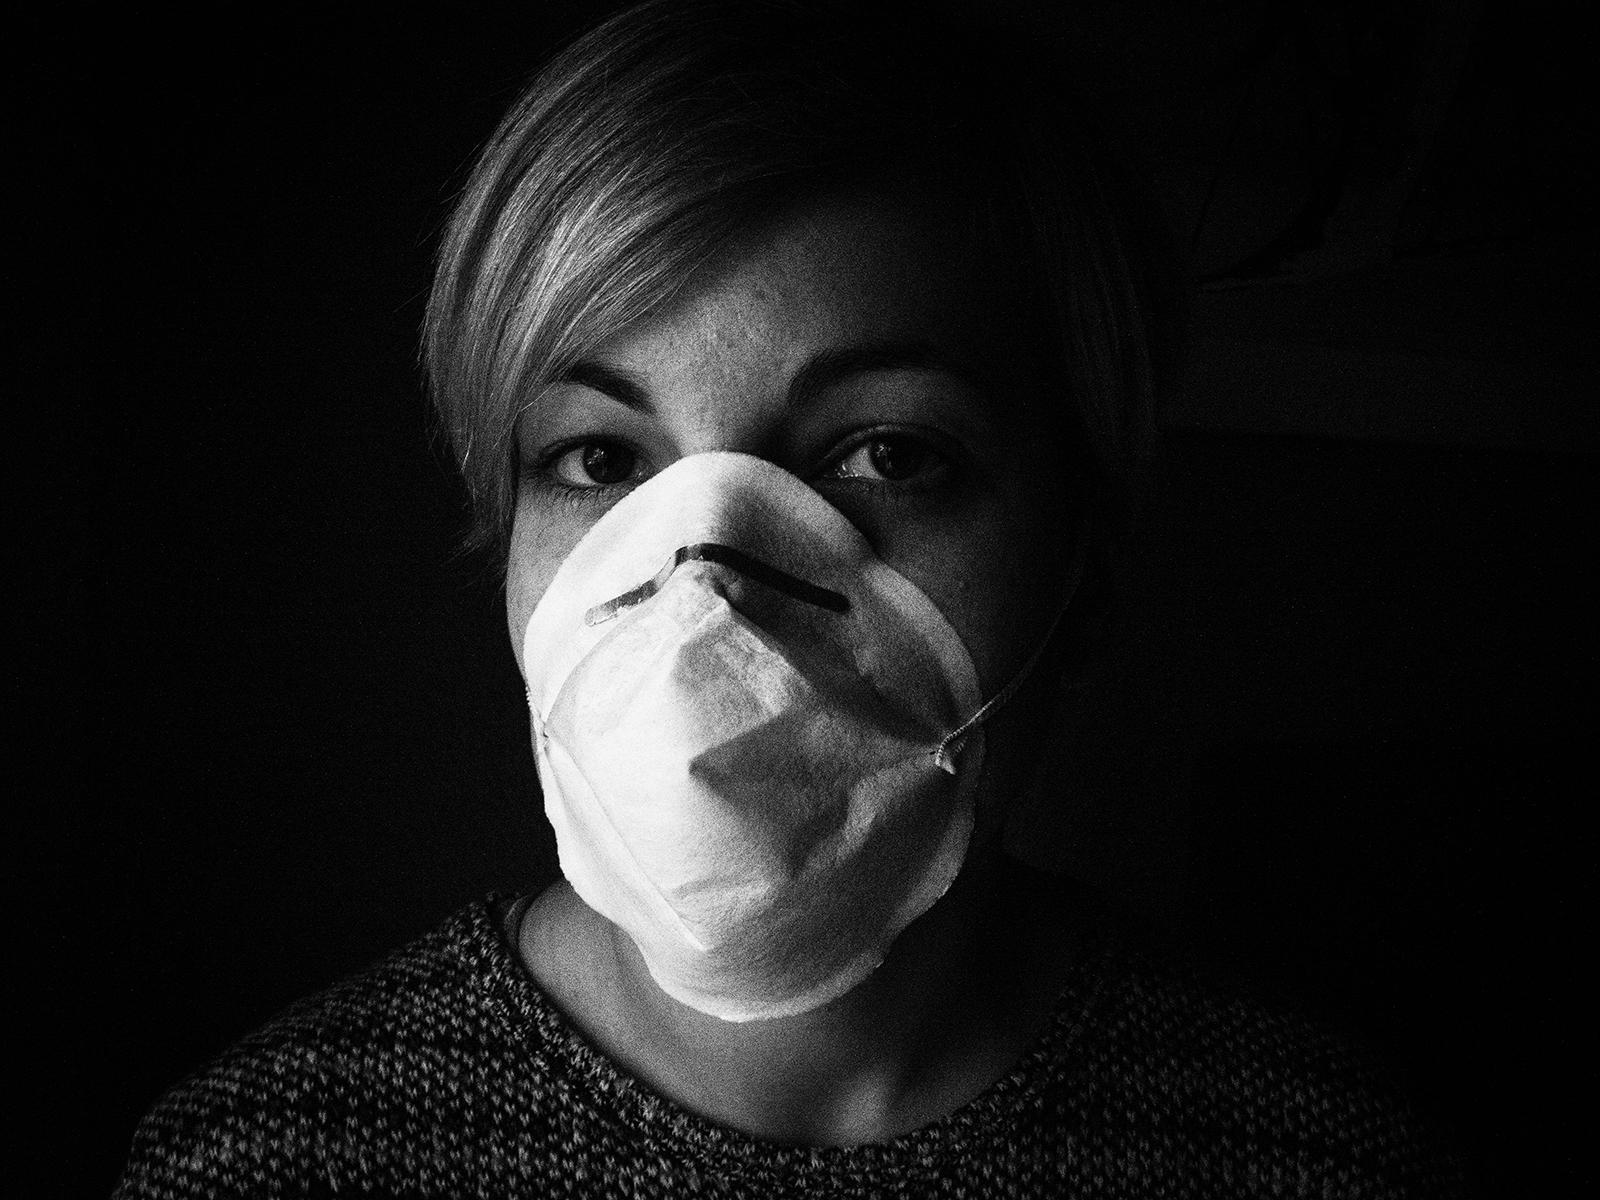 Lethargy. Social Alienation by Covid19 -  The surgical mask becomes a necessary accessory to go...